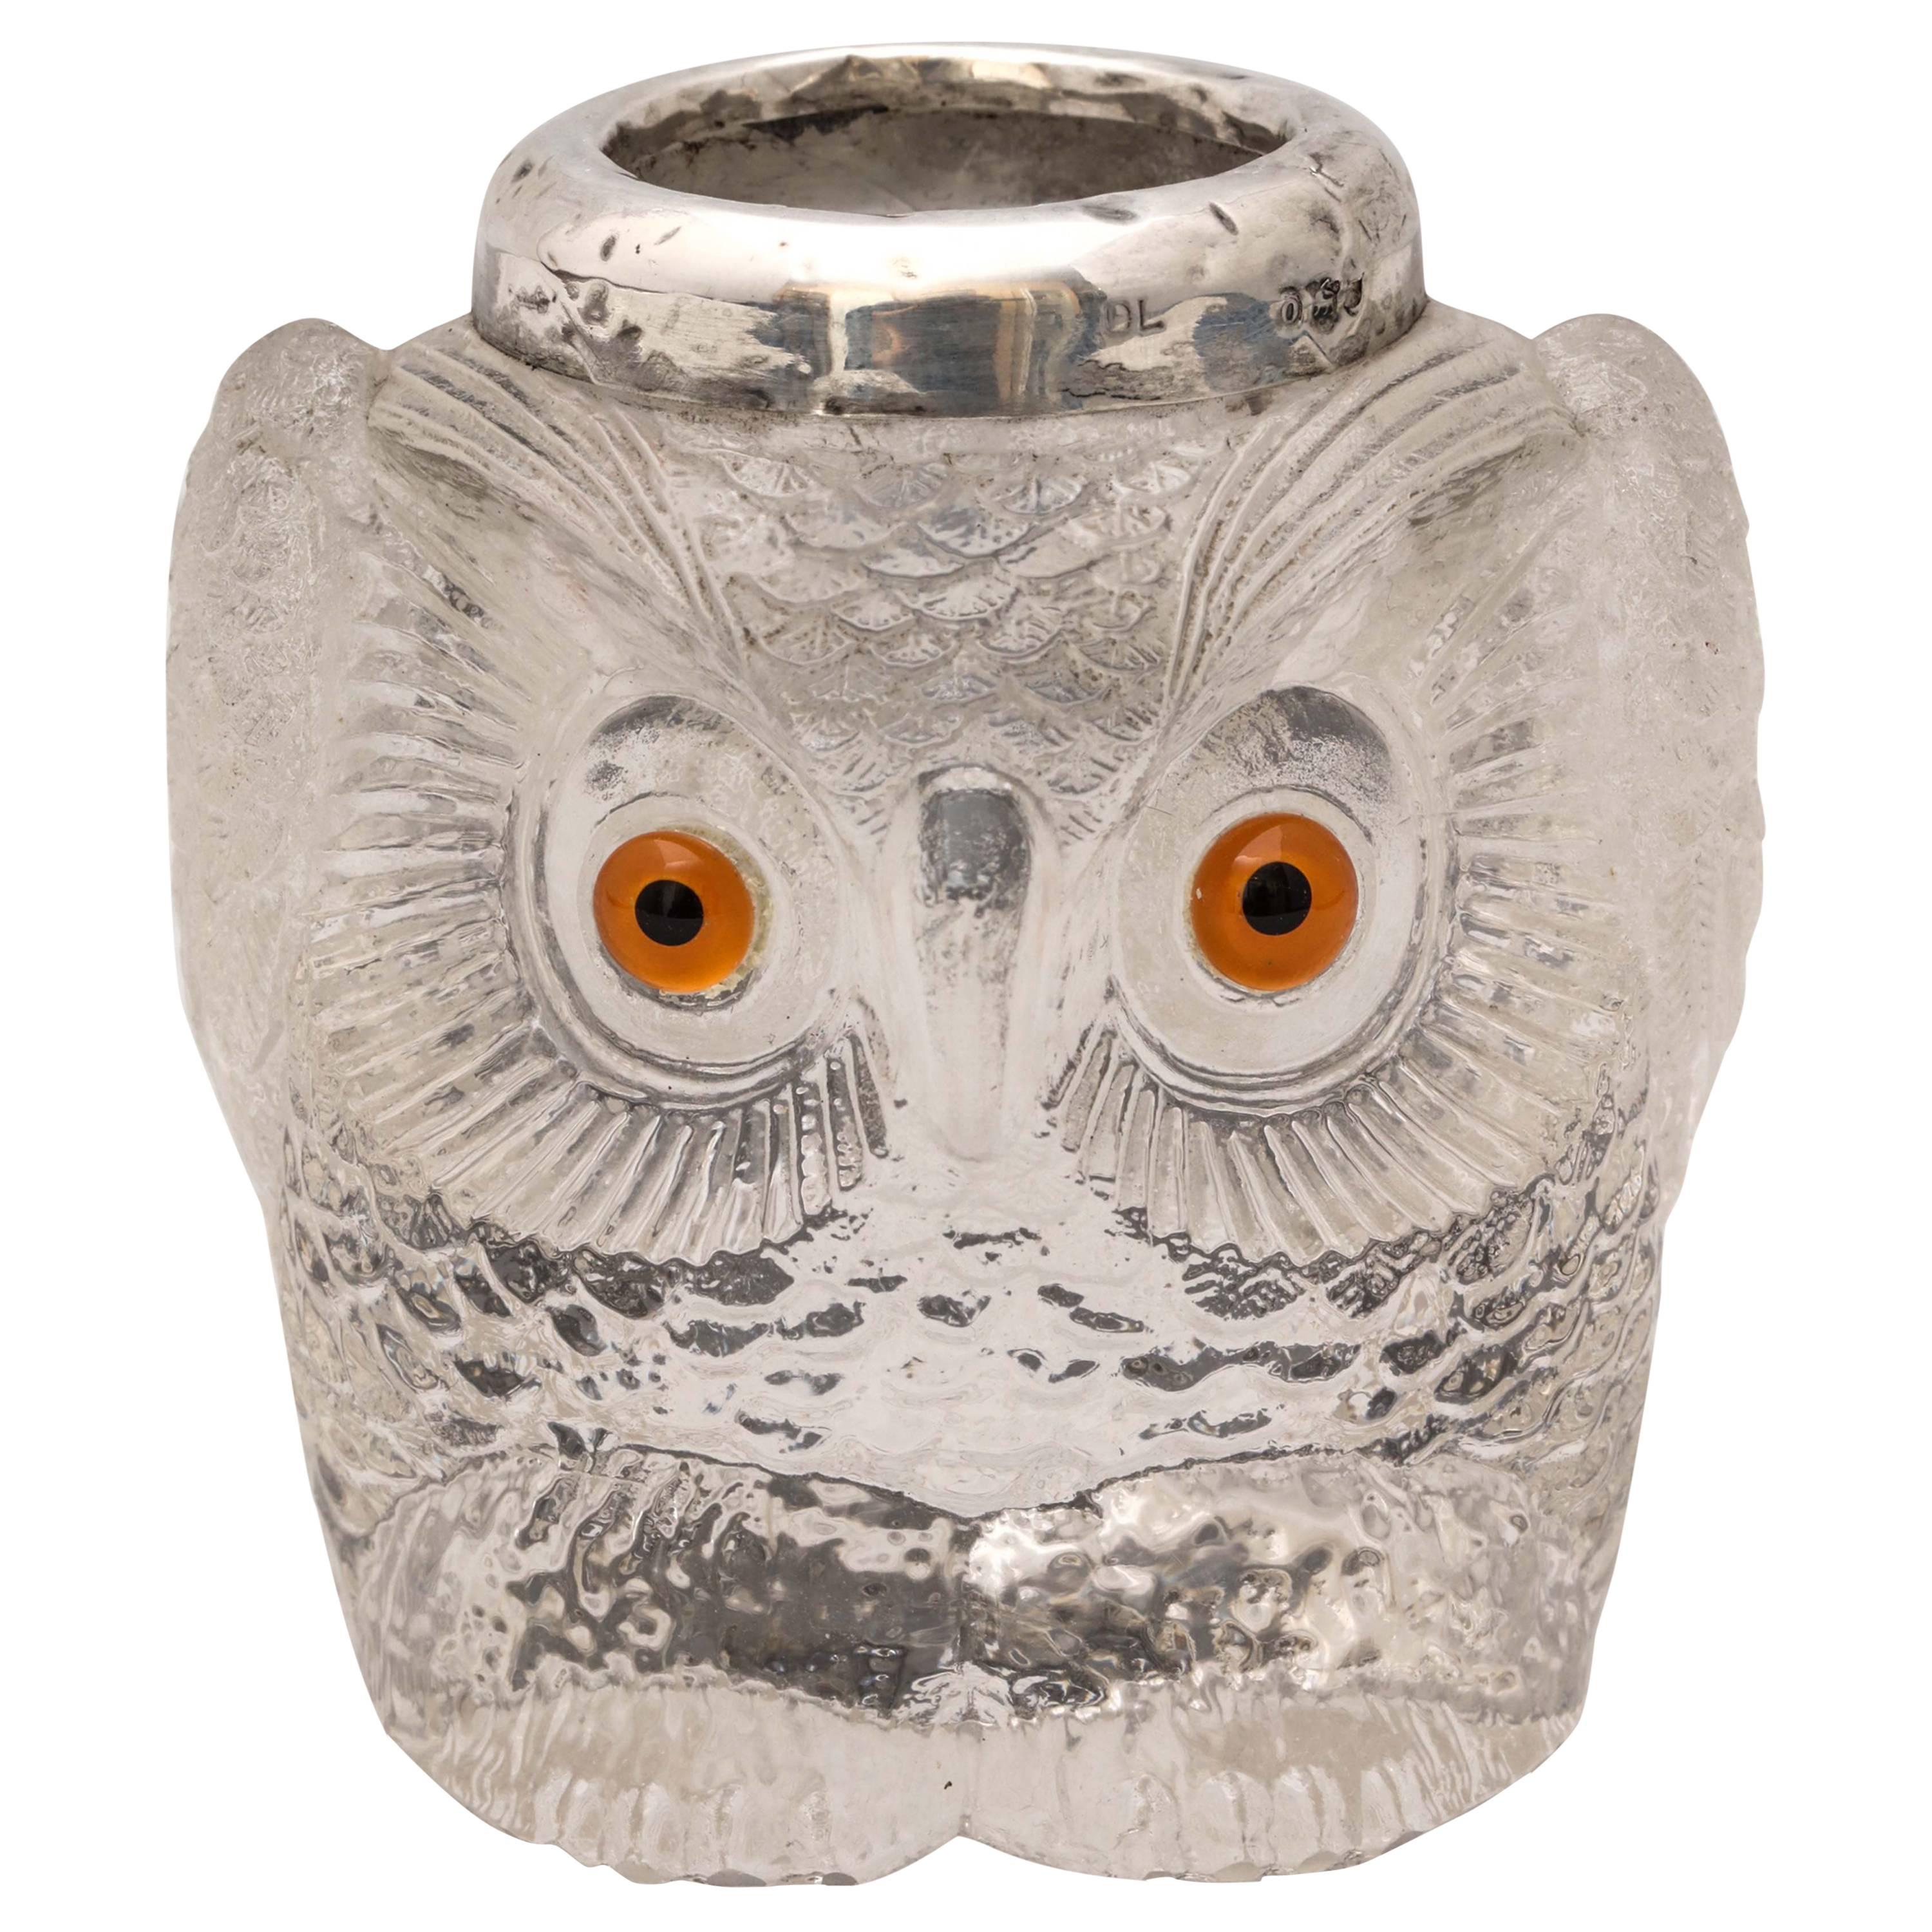 Rare and Unusual Edwardian Sterling Silver Mounted Owl-Form Match Striker